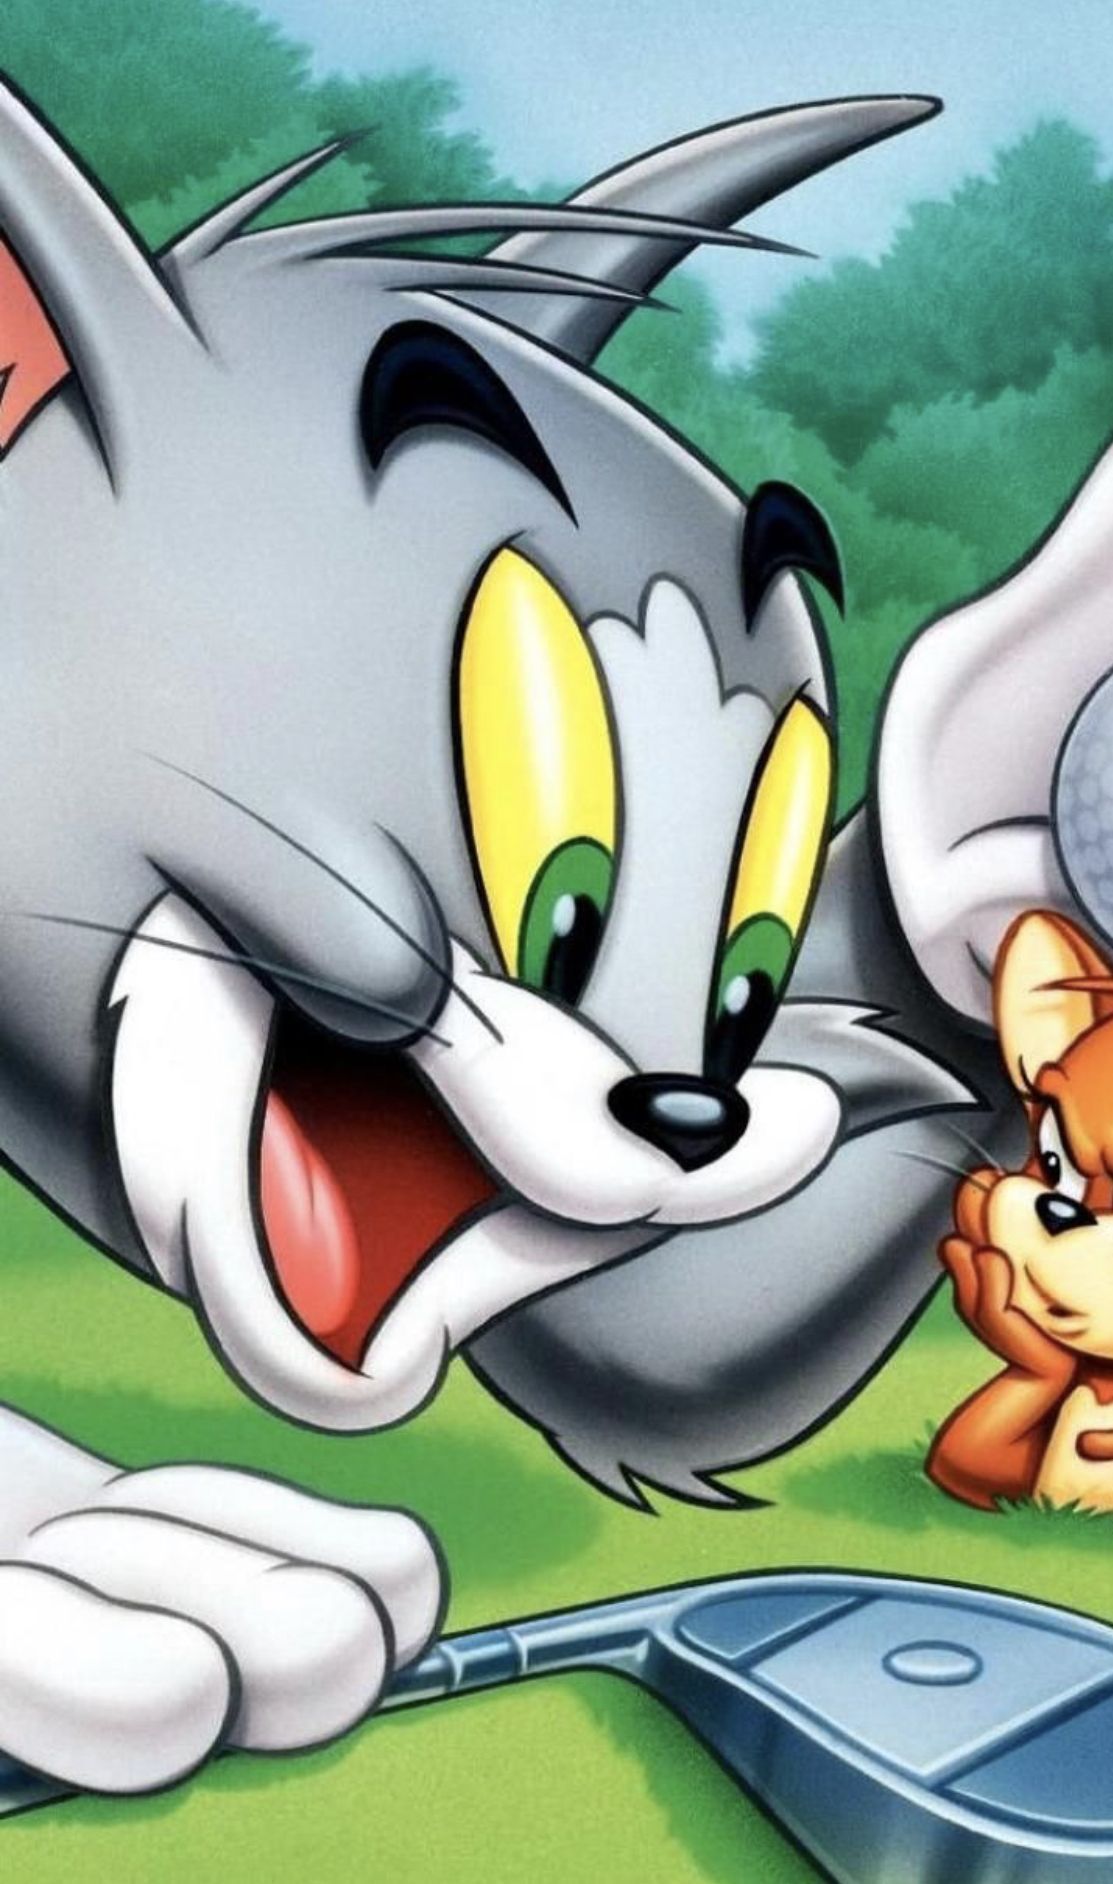 Tom & Jerry. Tom and jerry wallpaper, Cartoon wallpaper, Android wallpaper